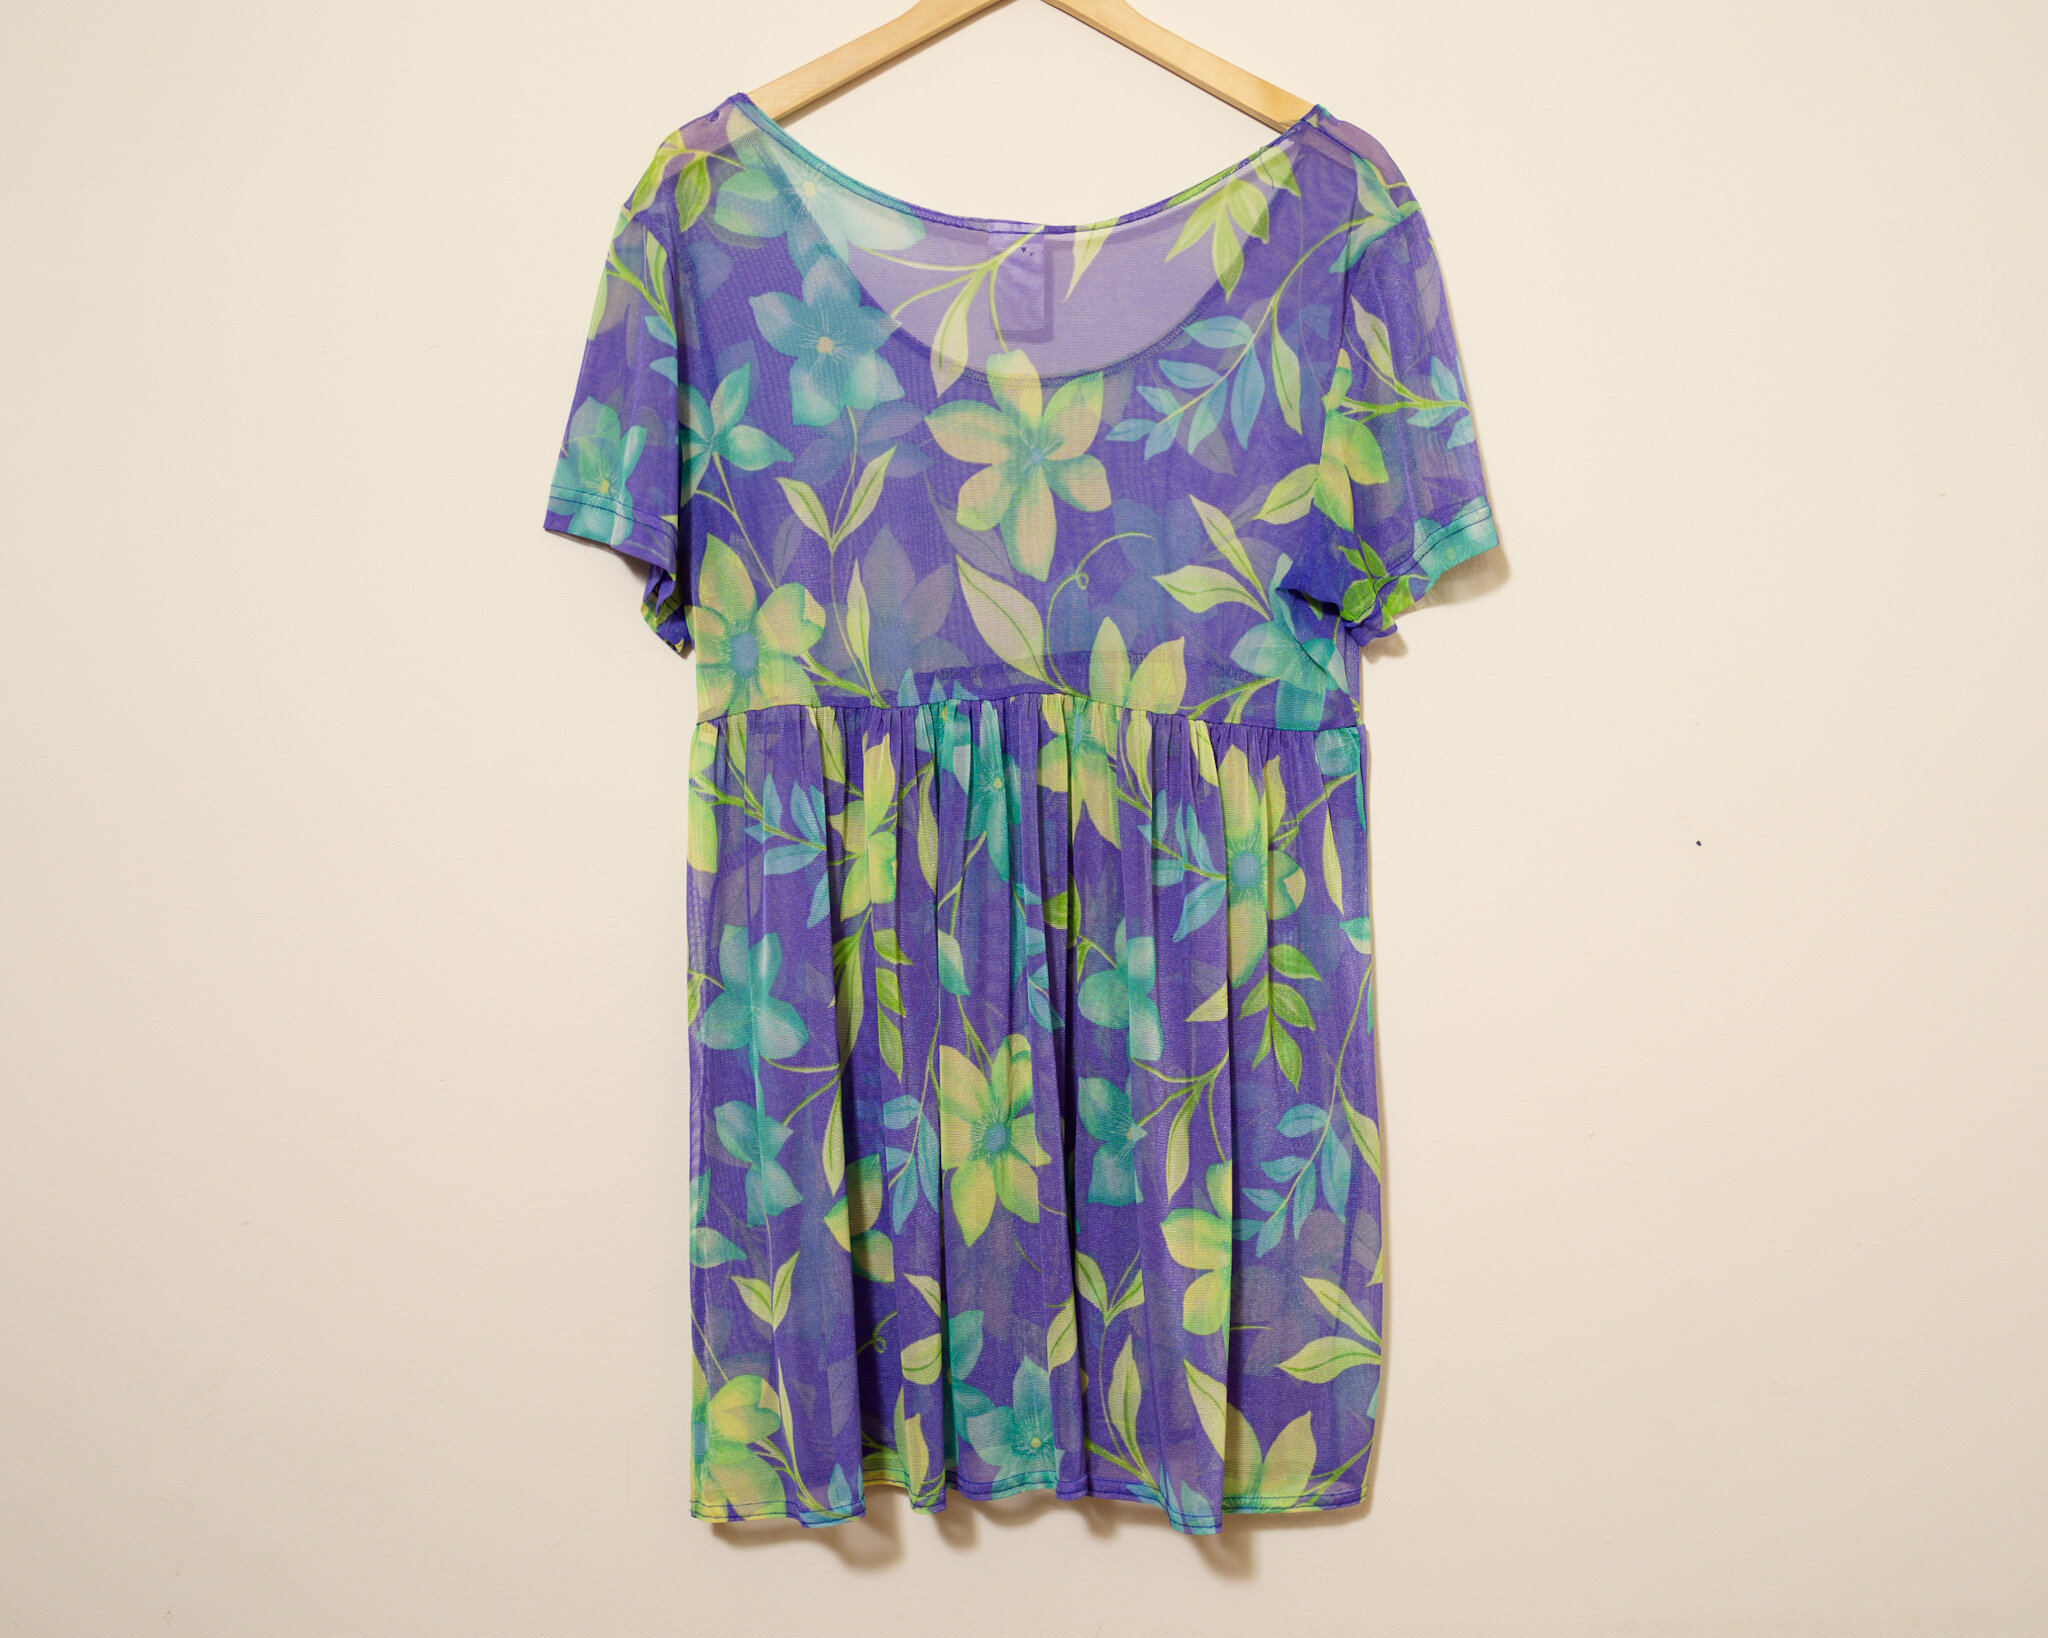 Sheer 80s Mesh Plus Size Bright Floral Tropical Print